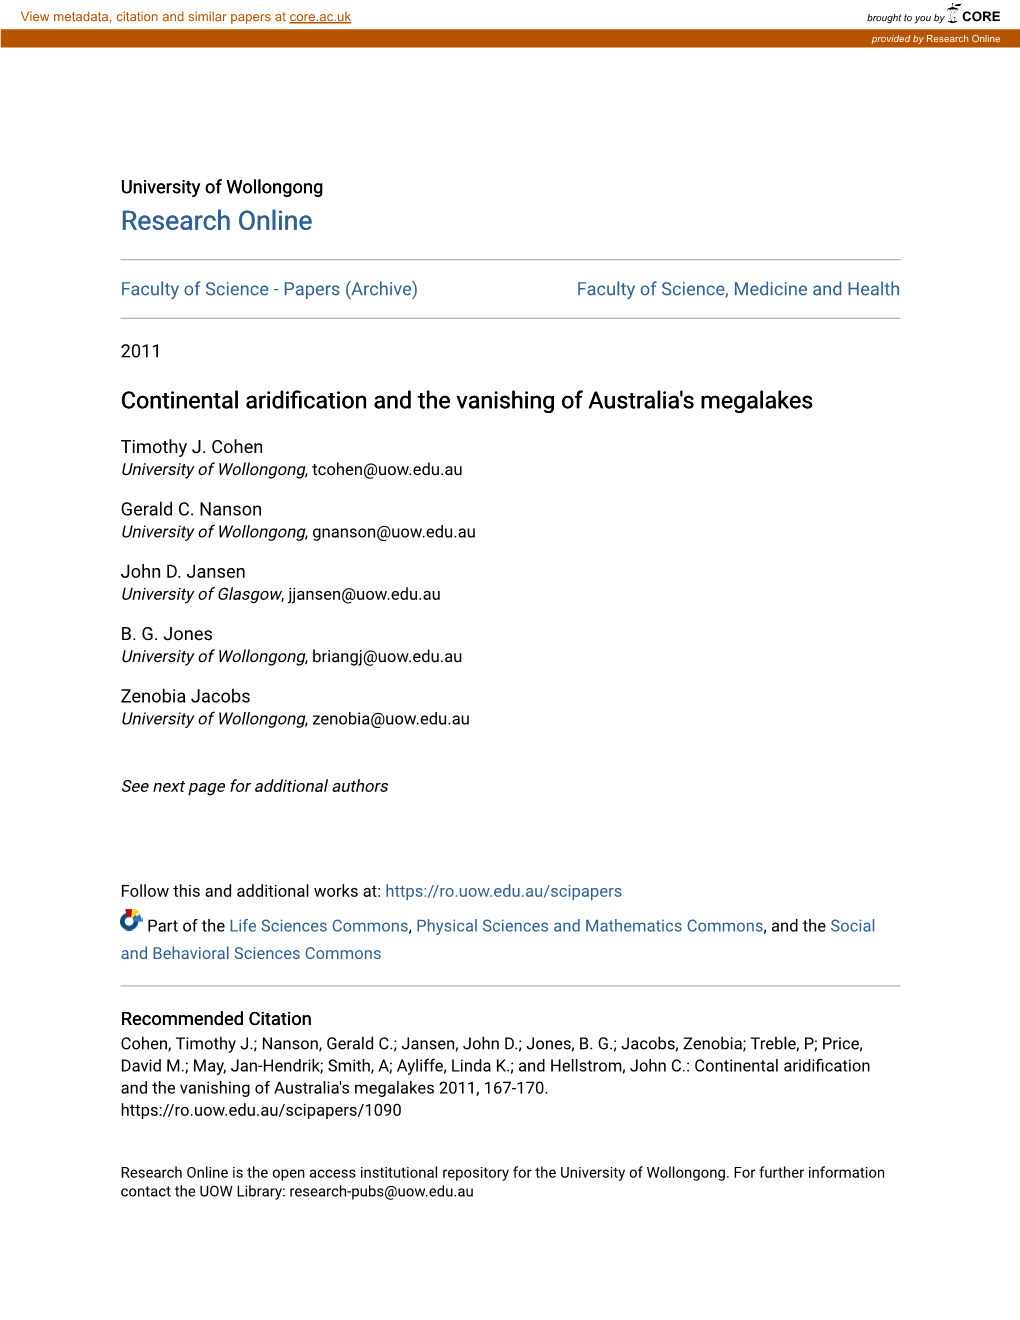 Continental Aridification and the Vanishing of Australia's Megalakes 2011, 167-170